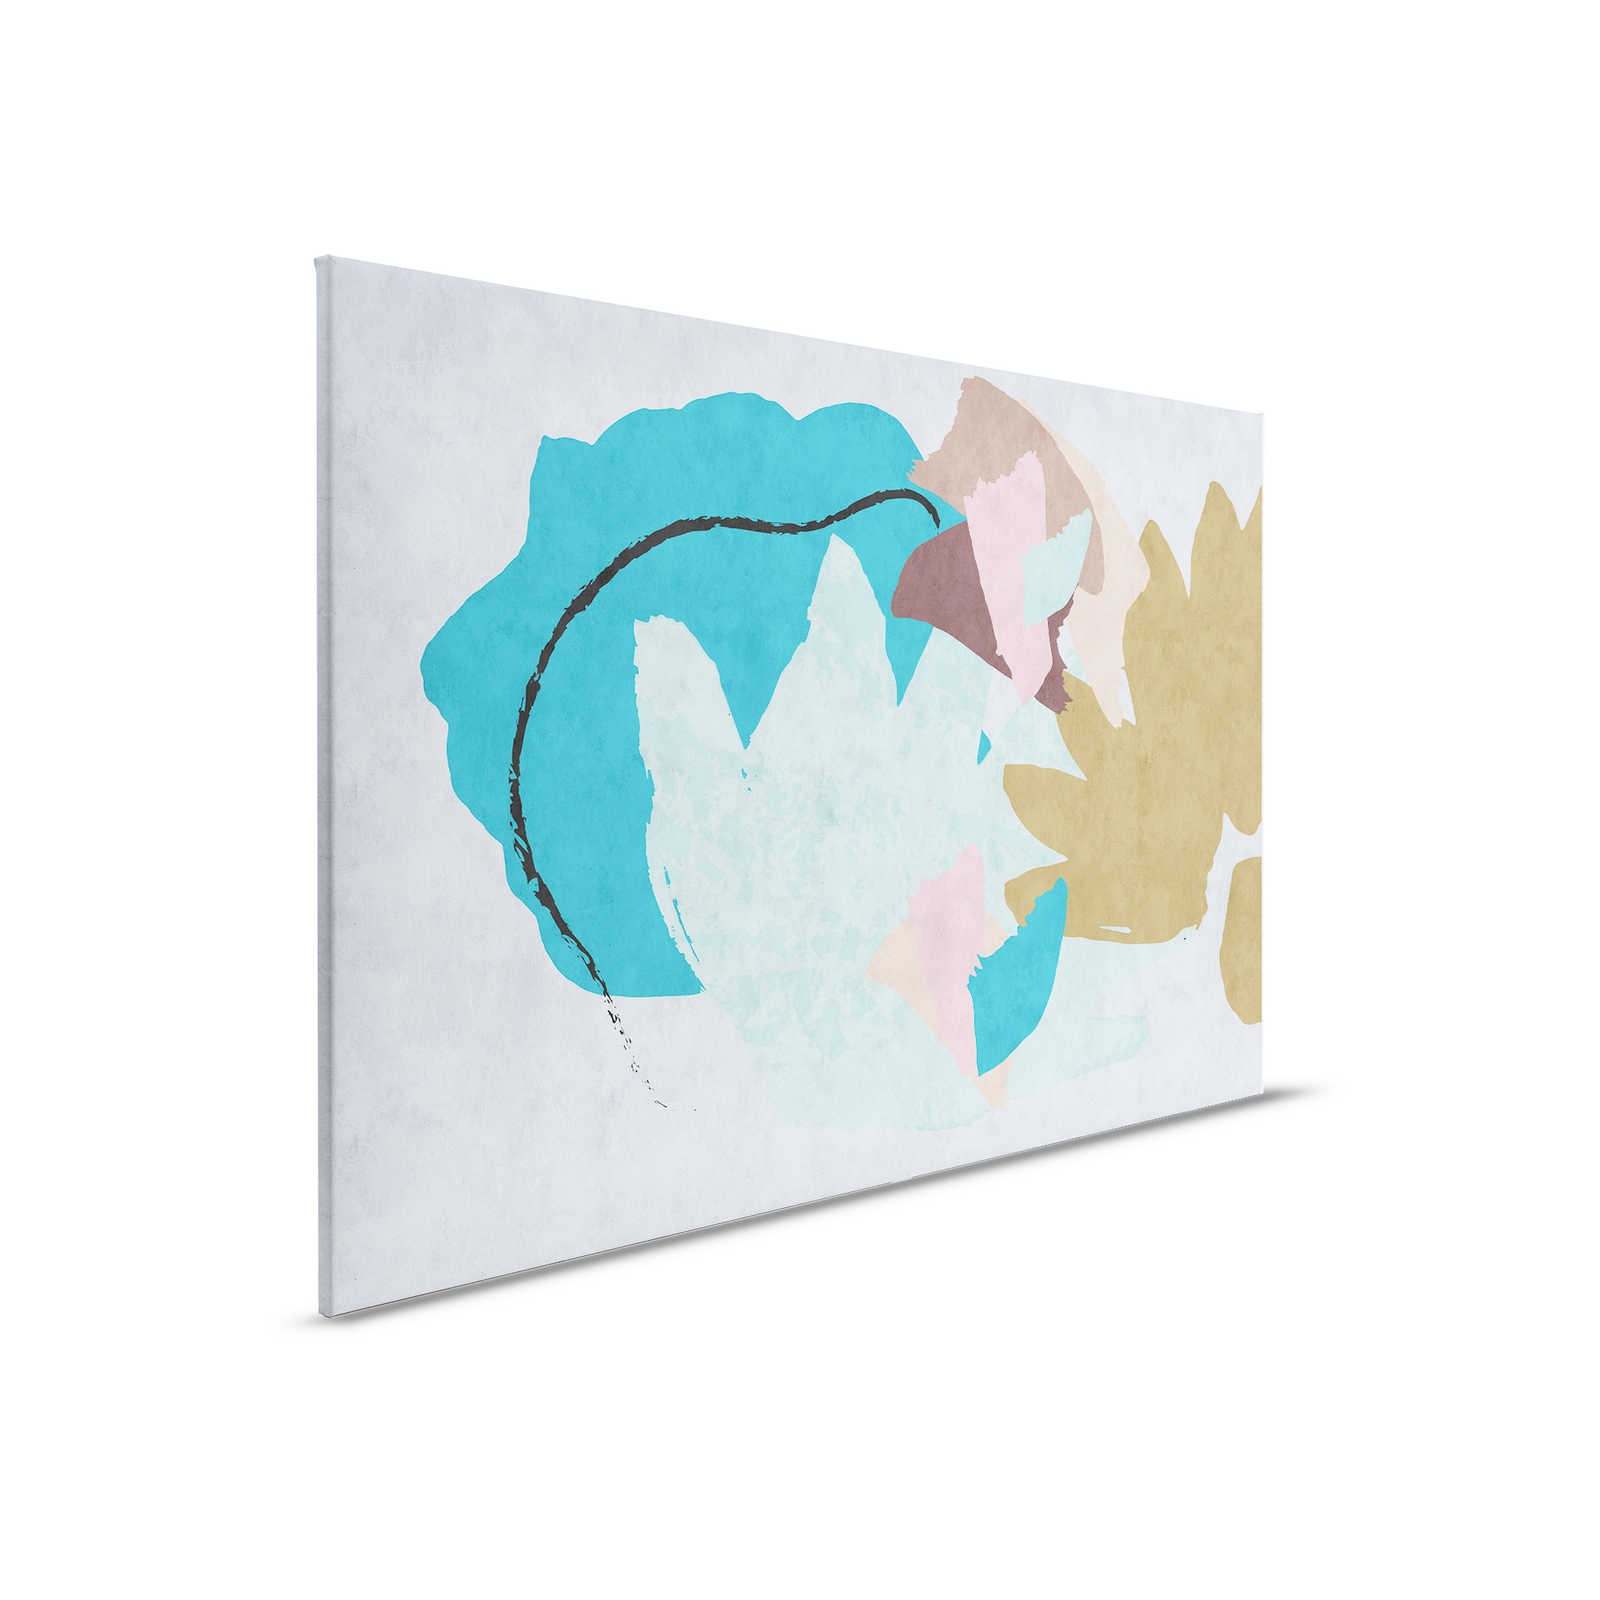         Floral Collage 1 - Abstract Canvas Painting, Colourful Art- Blotting Paper Texture - 0.90 m x 0.60 m
    